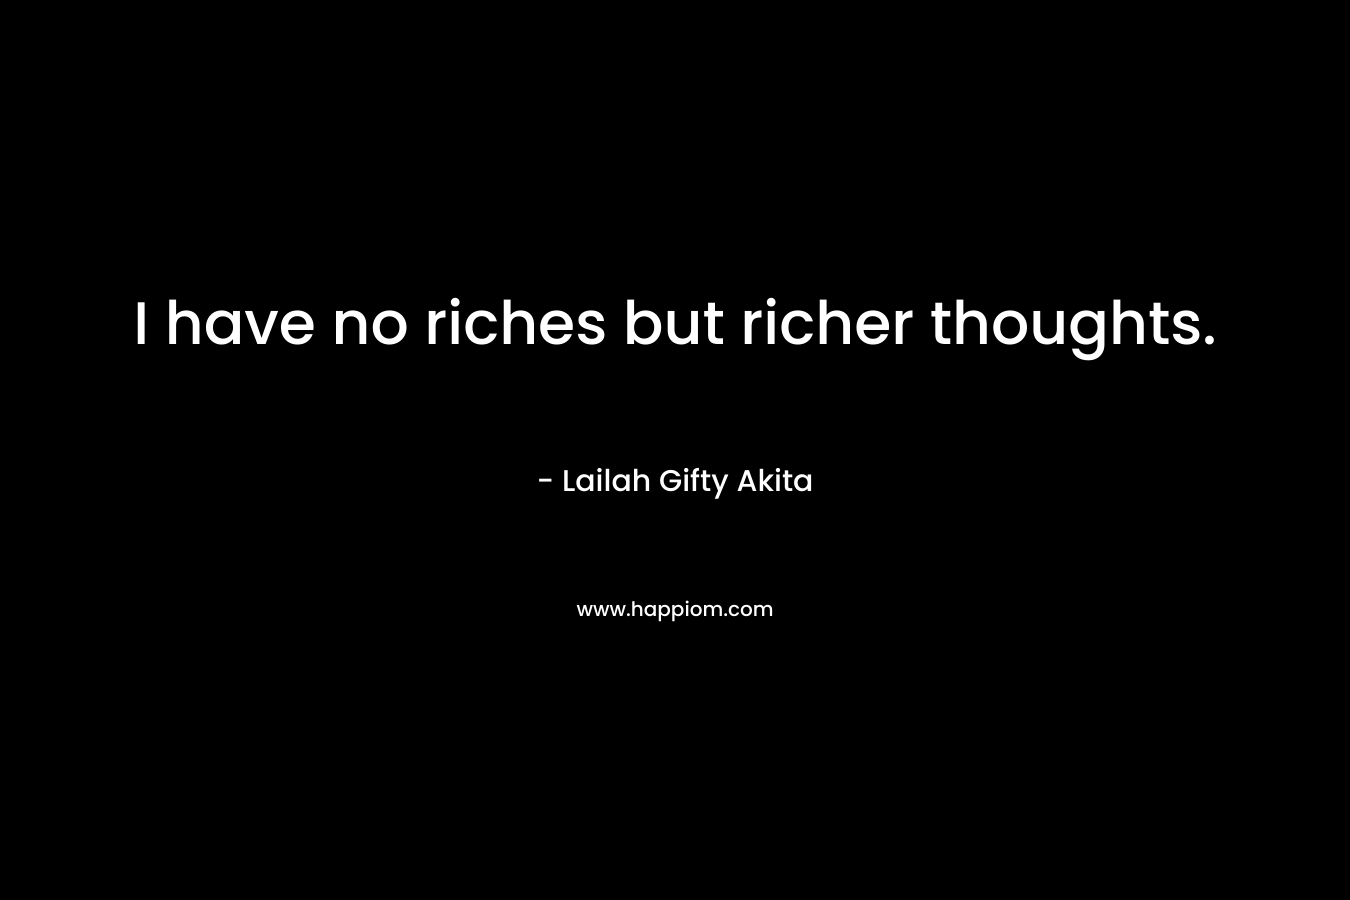 I have no riches but richer thoughts.